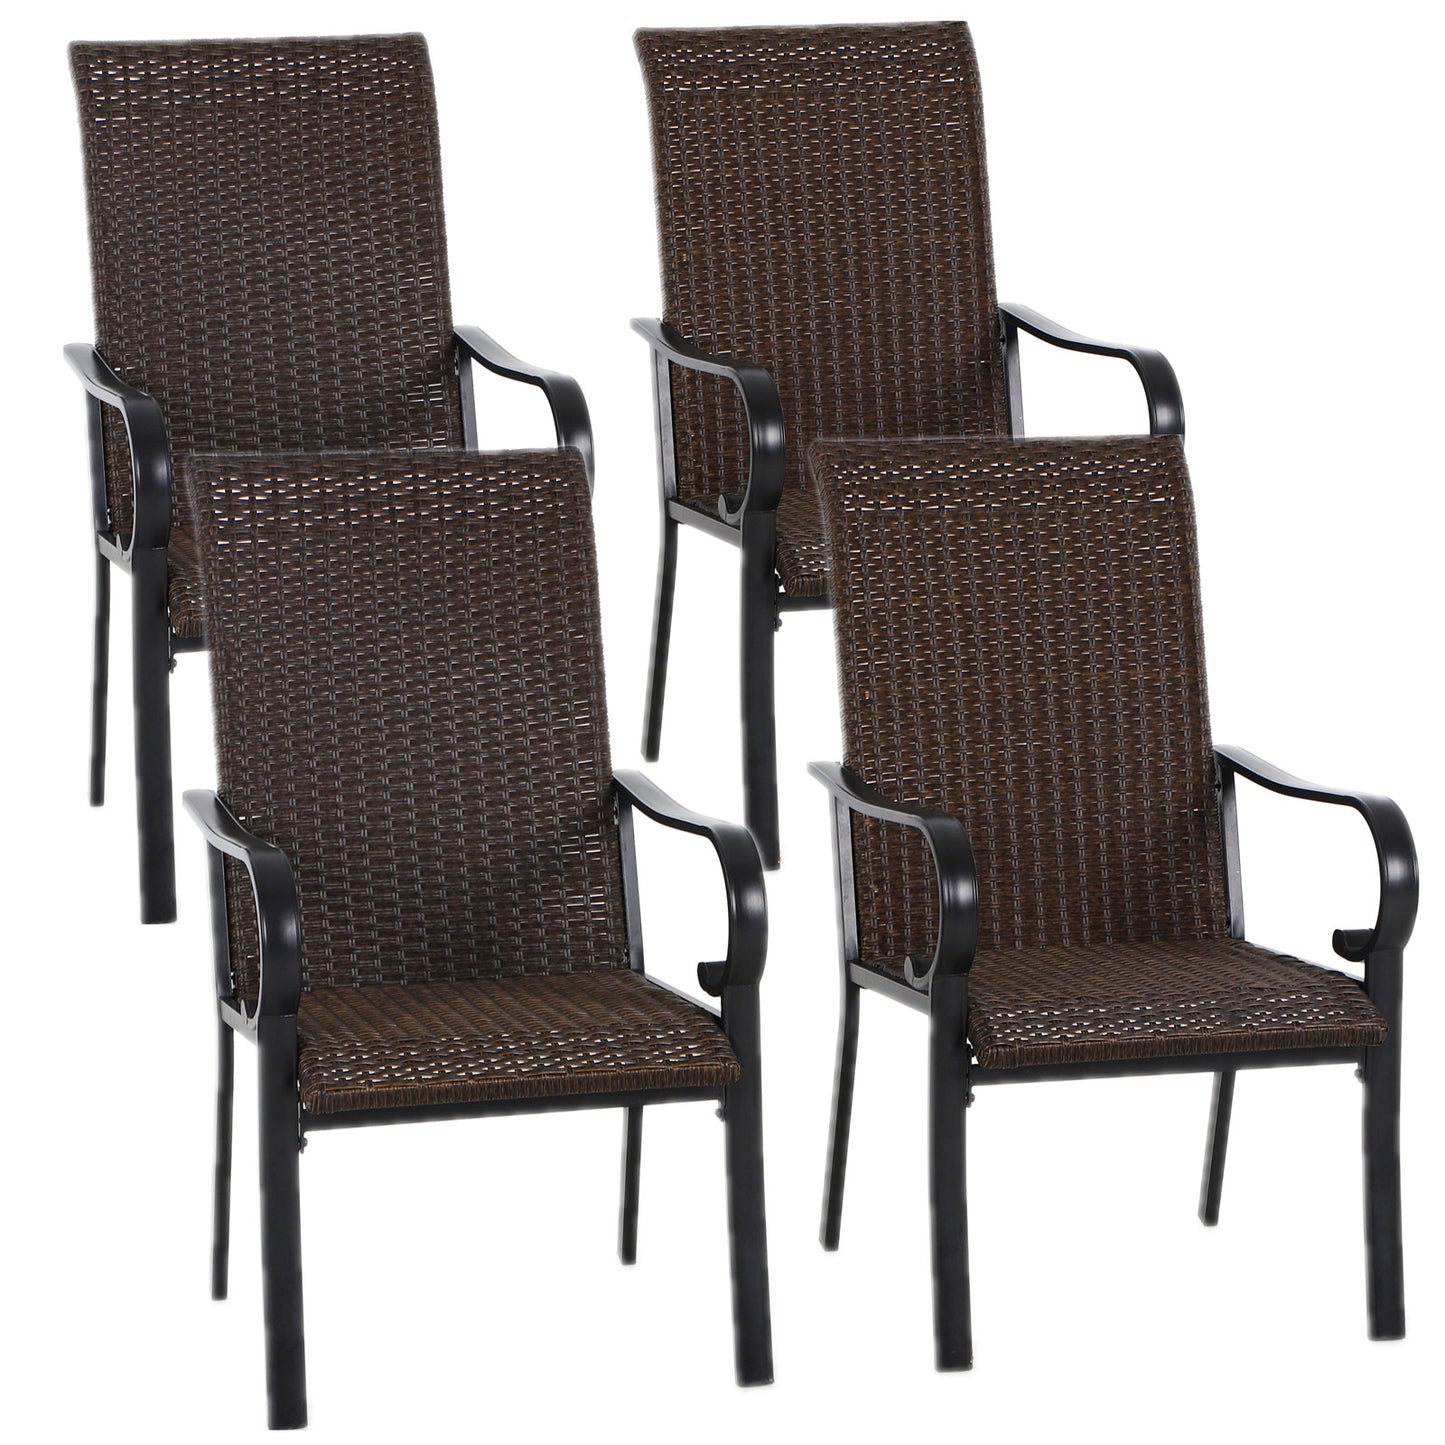 Sophia & William Set of 2 Patio Wicker Rattan Dining Chairs - Brown